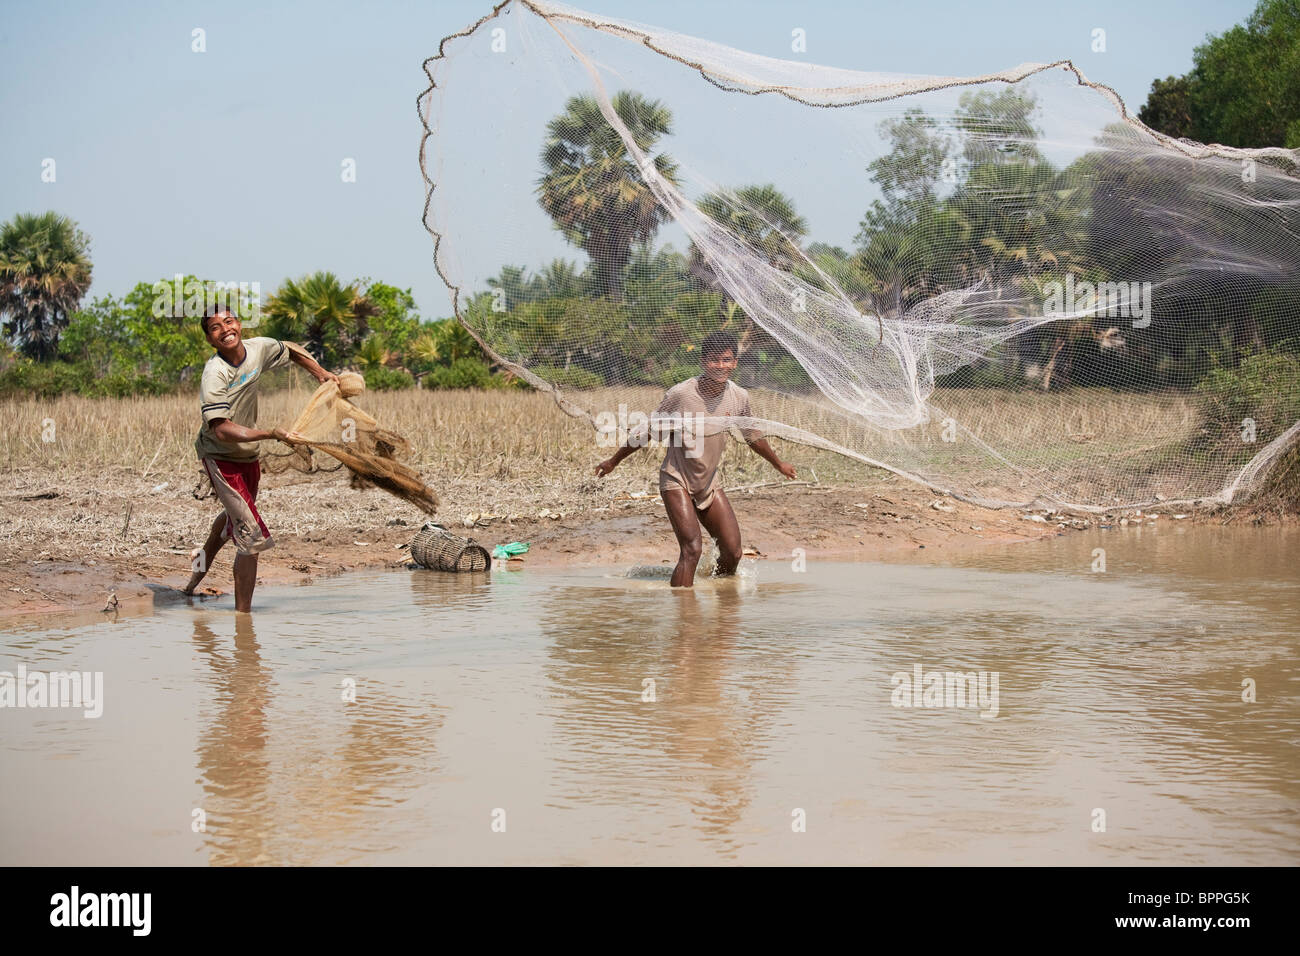 https://c8.alamy.com/comp/BPPG5K/young-man-using-a-throw-net-to-catch-fish-in-rural-cambodia-BPPG5K.jpg